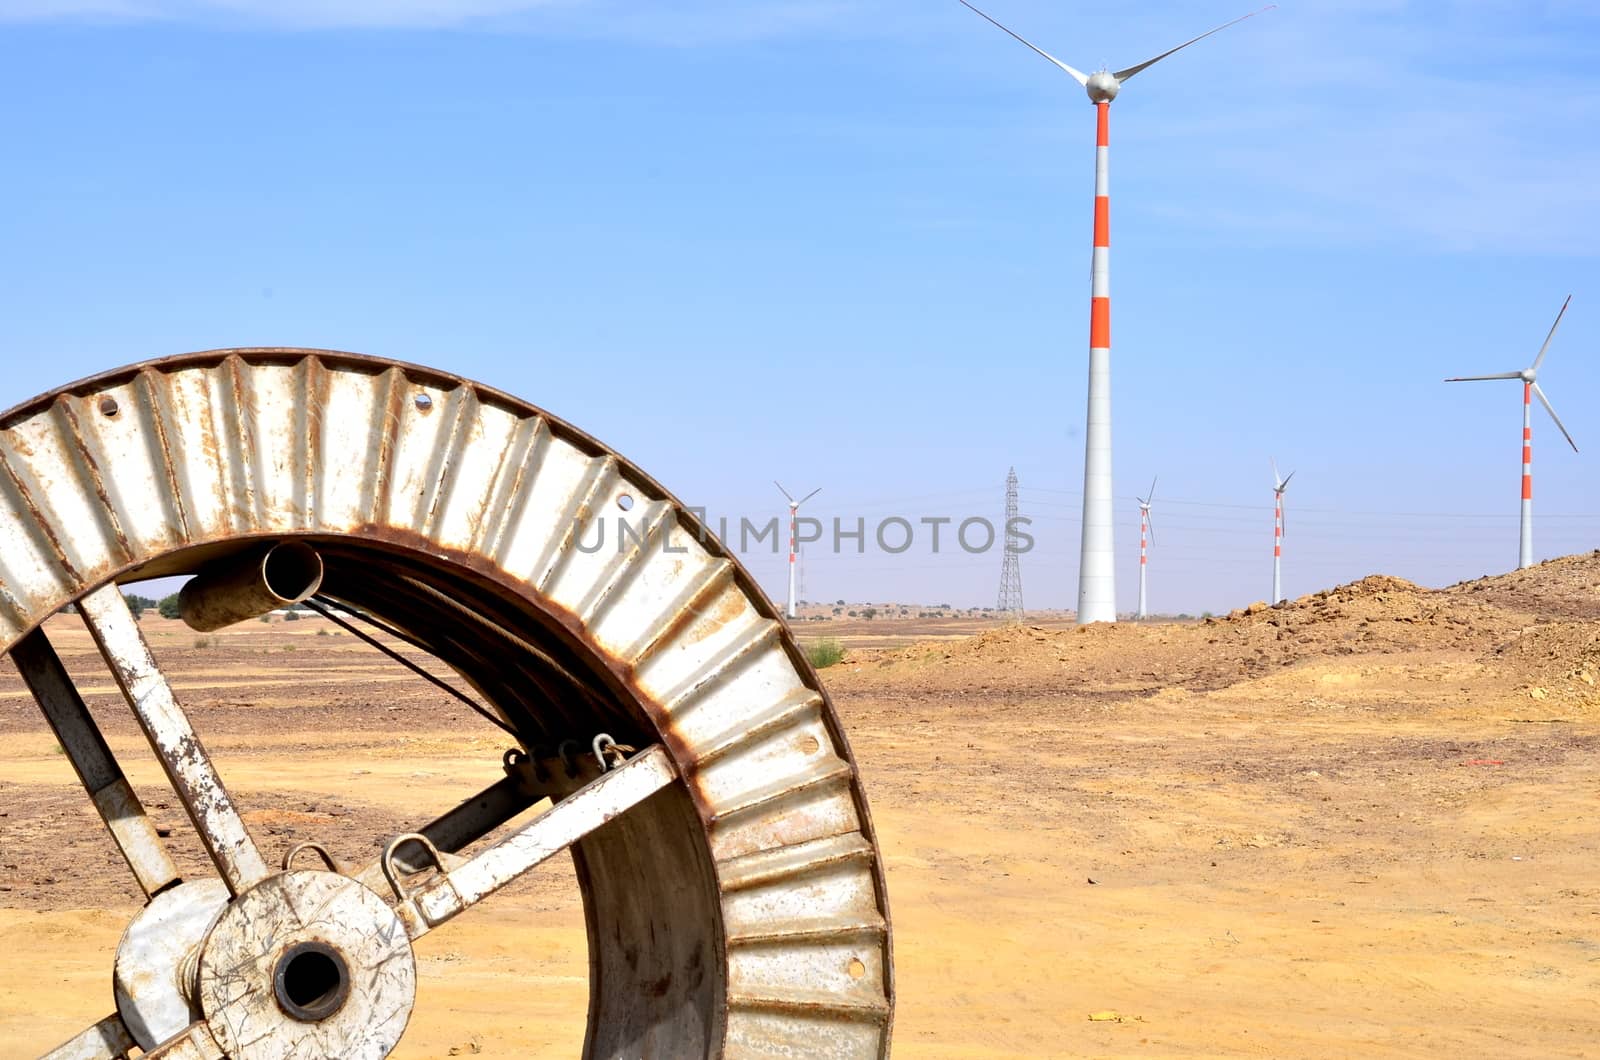 Windmills in the backdrop of a winding wheel on the way to Sam Sand Dunes (Thar Desert) from Jaisalmer, Rajasthan, India. The Jaisalmer Wind Park is India's 2nd largest operational onshore wind farm. by jayantbahel